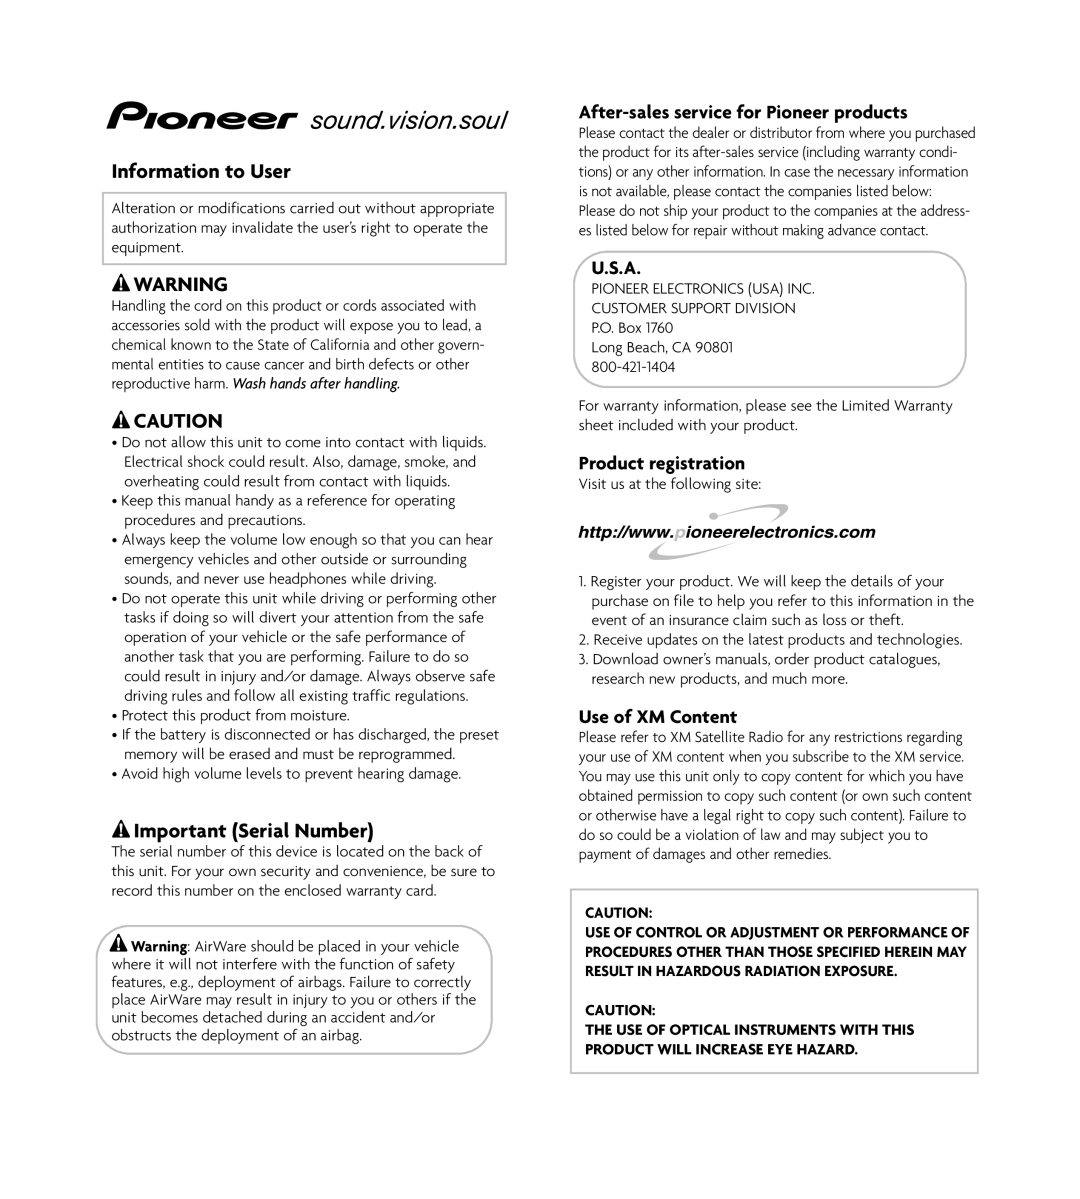 Pioneer GEX-AIRWARE1 manual Information to User, Important Serial Number, After-salesservice for Pioneer products, U.S.A 